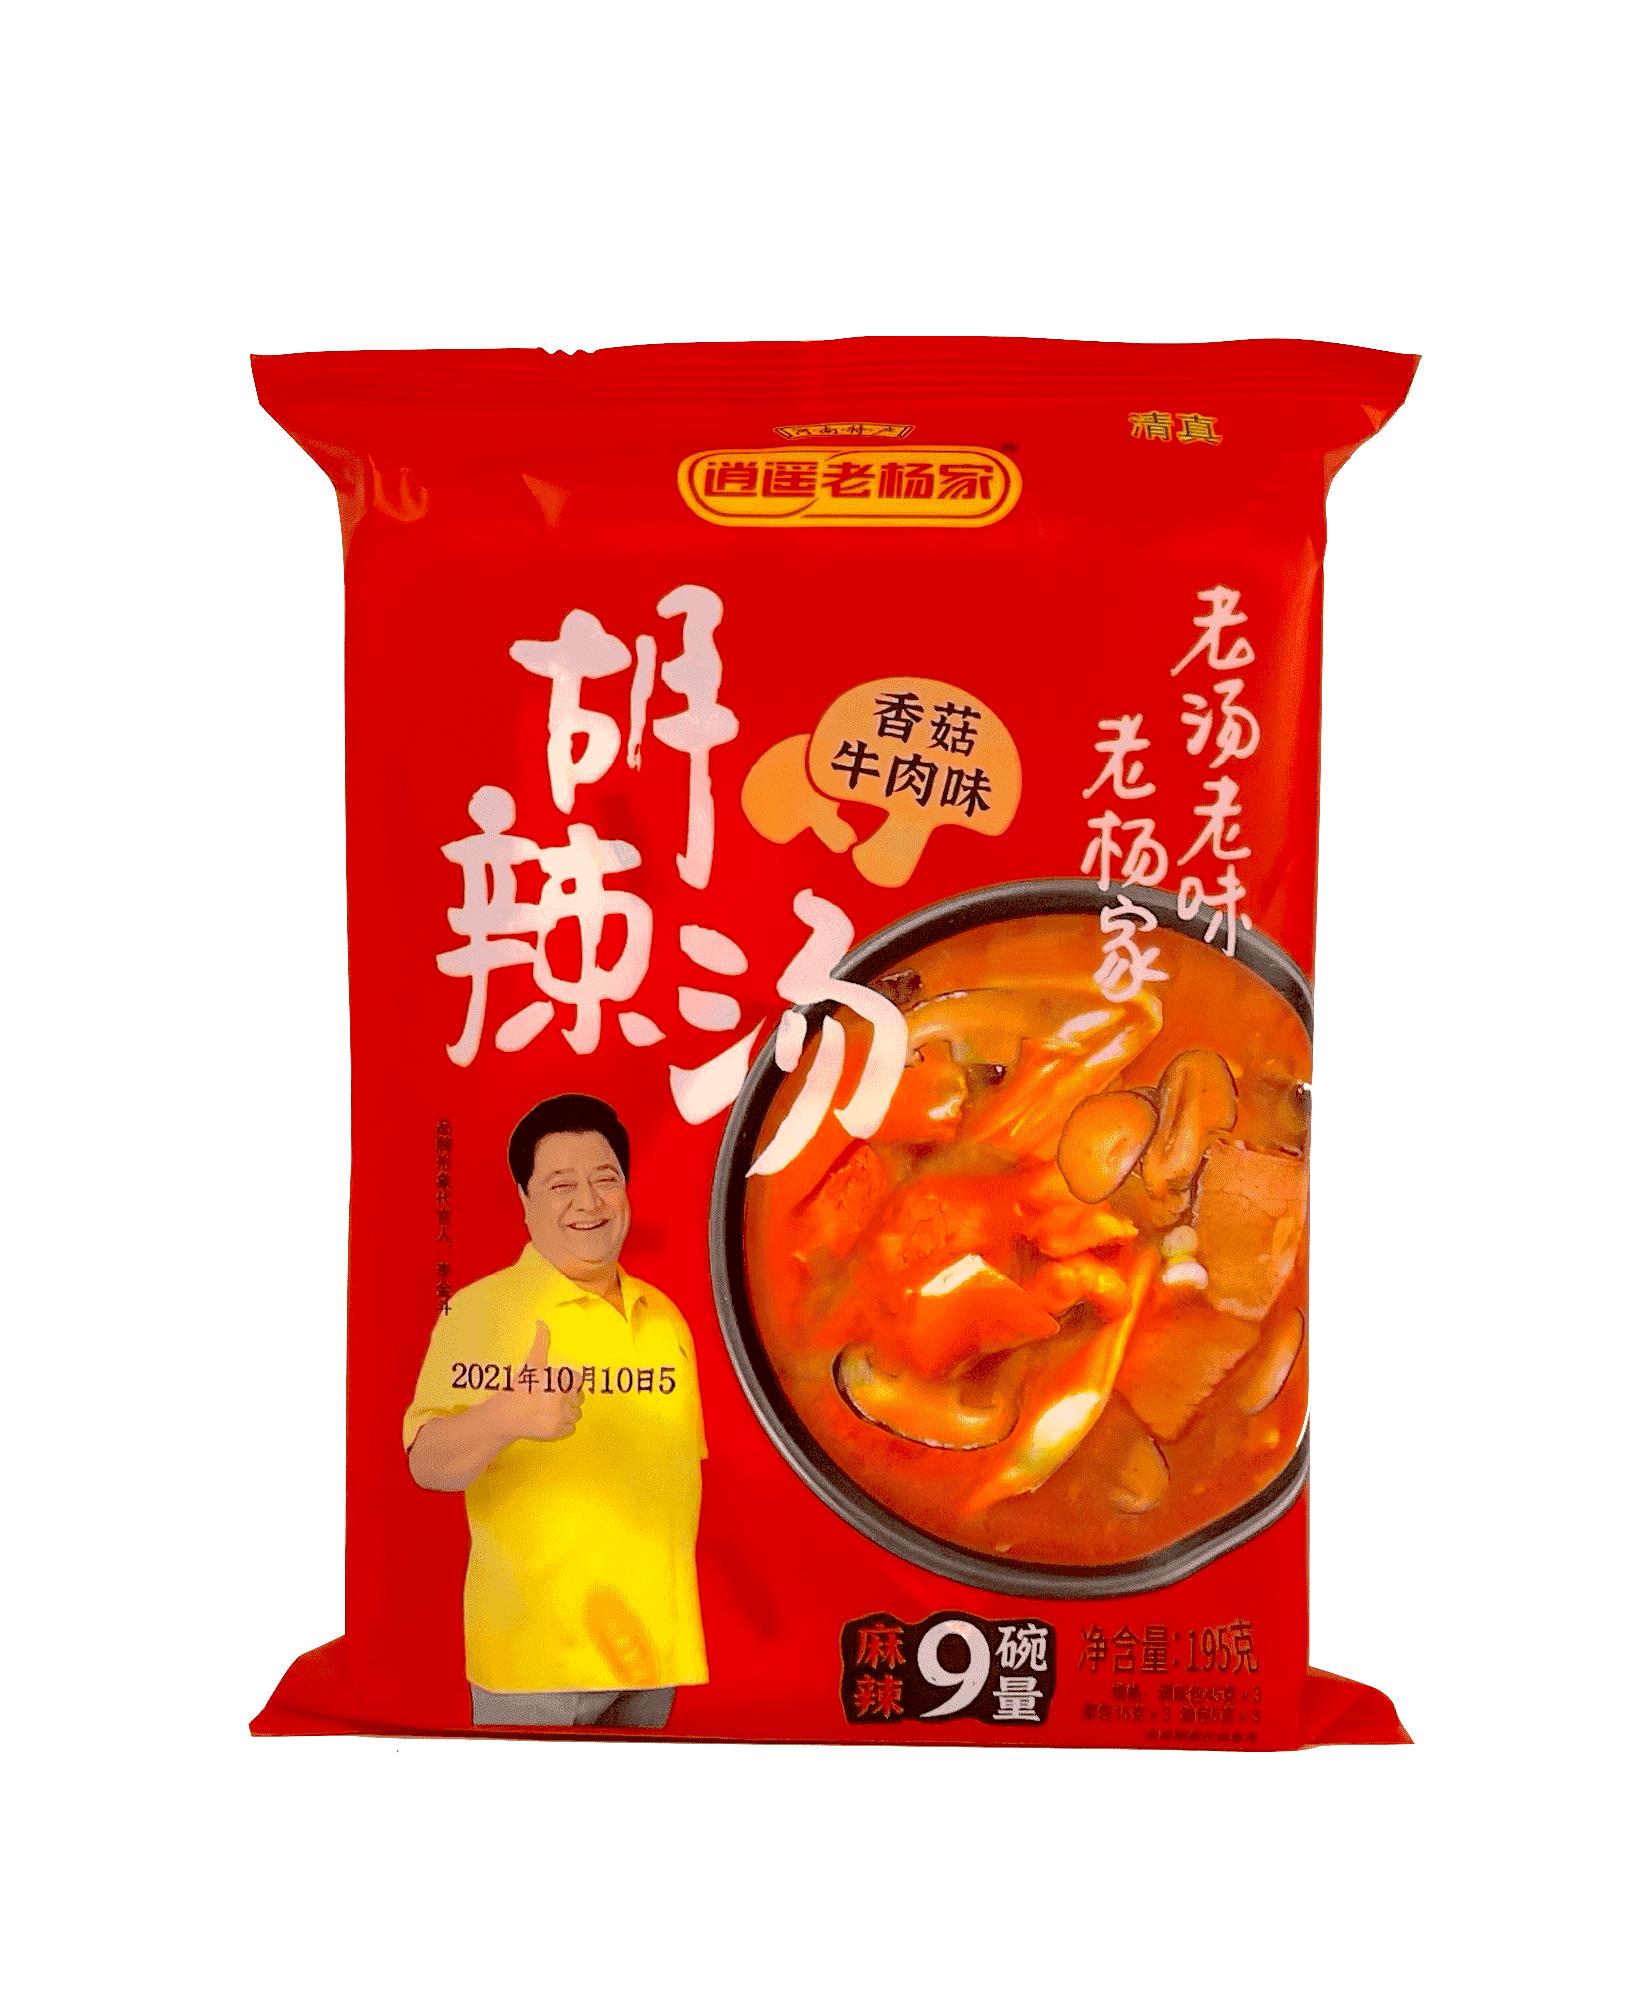 Best Before: 2022.10.09 Instant Soup Hot / Spicy Flavour 195g Hu La Tang Lao Yang Jia China